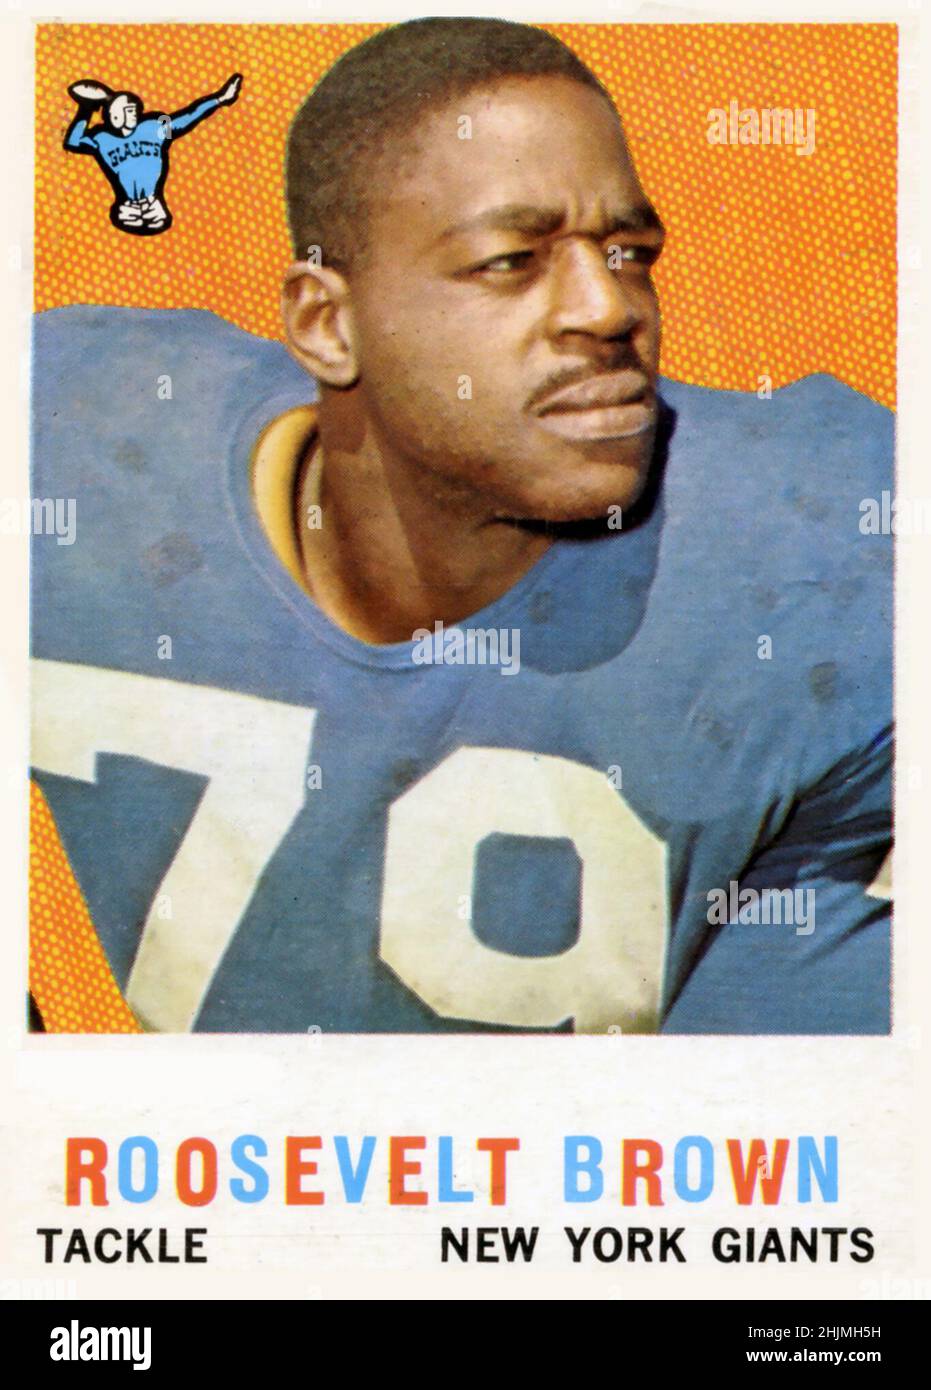 1959 Topps football card featuring Roosevelt Brown with the New York Giants. Stock Photo